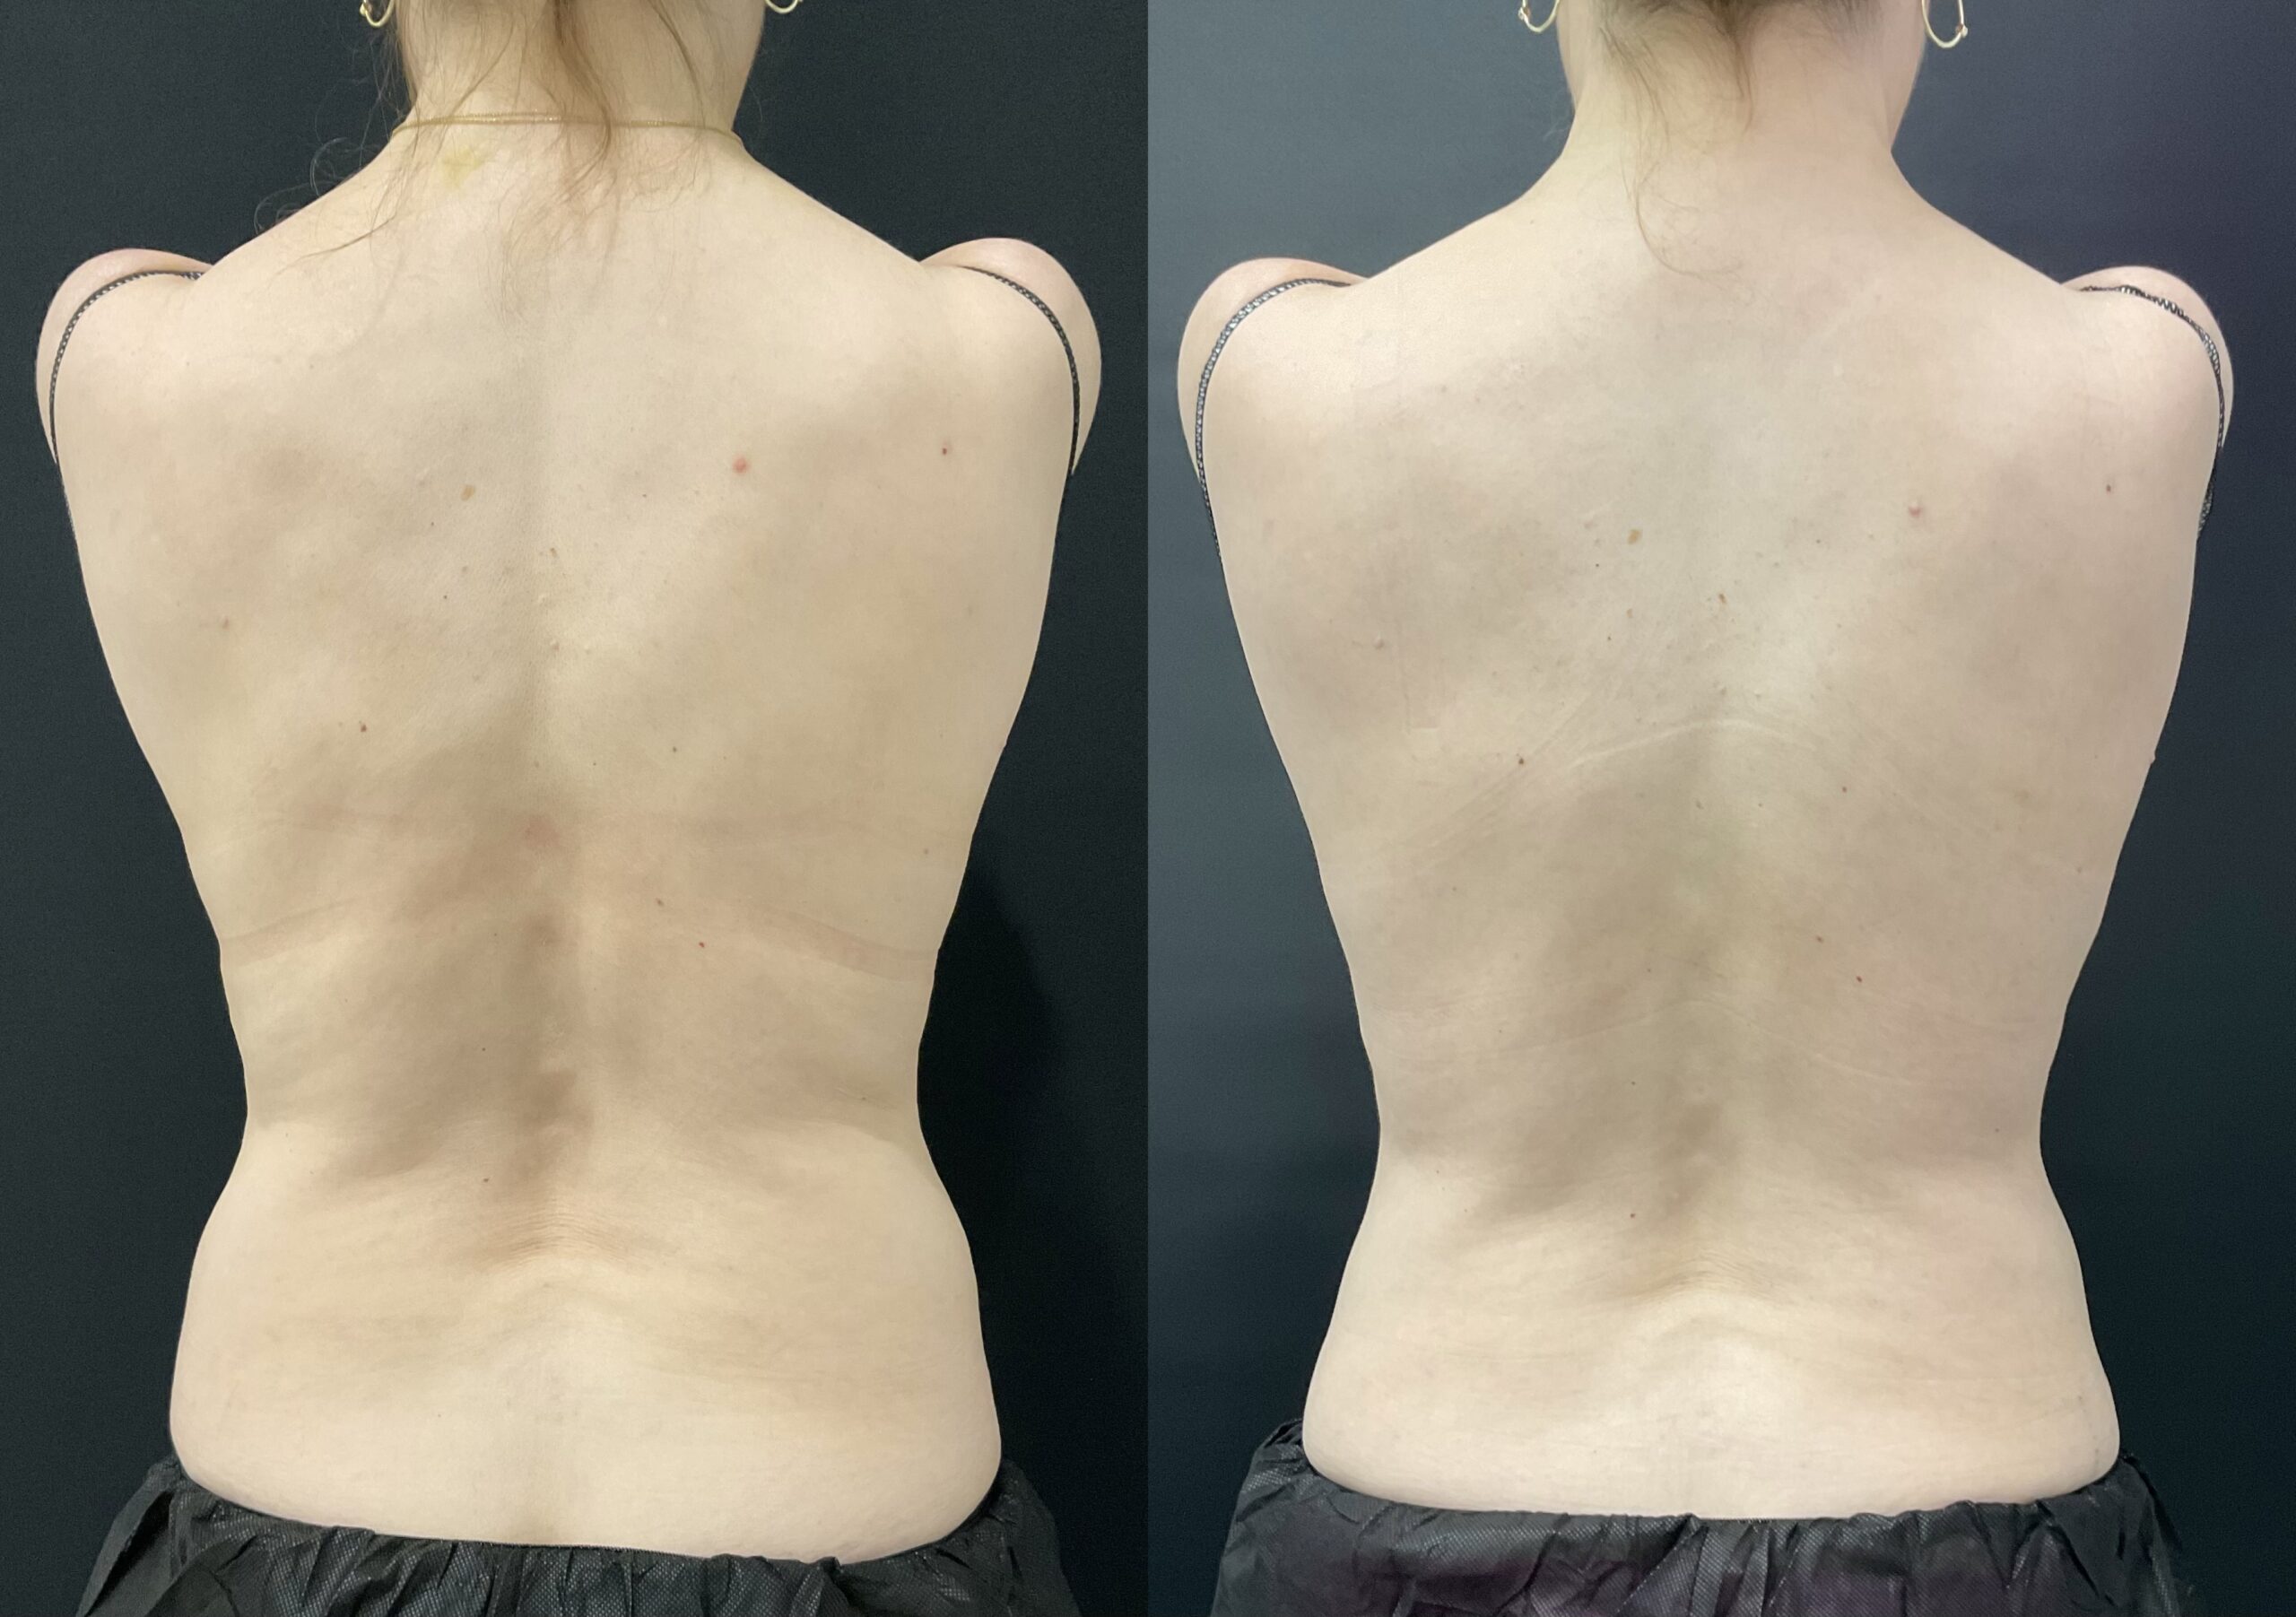 1 Coolsculpting Treatment to Lower Flanks